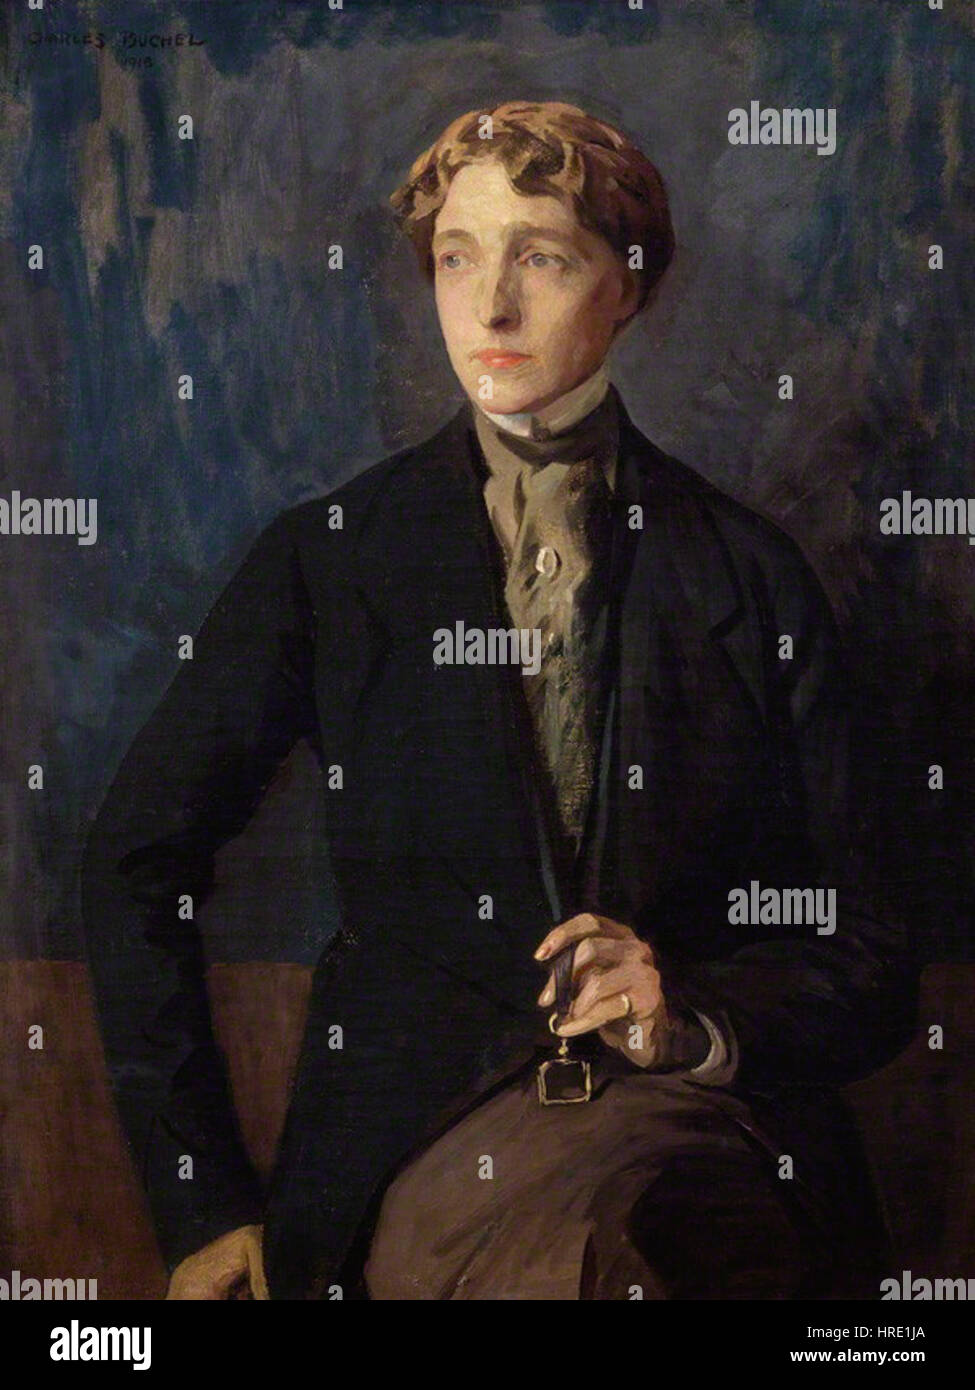 Charles Buchel - Radclyffe Hall Banque D'Images